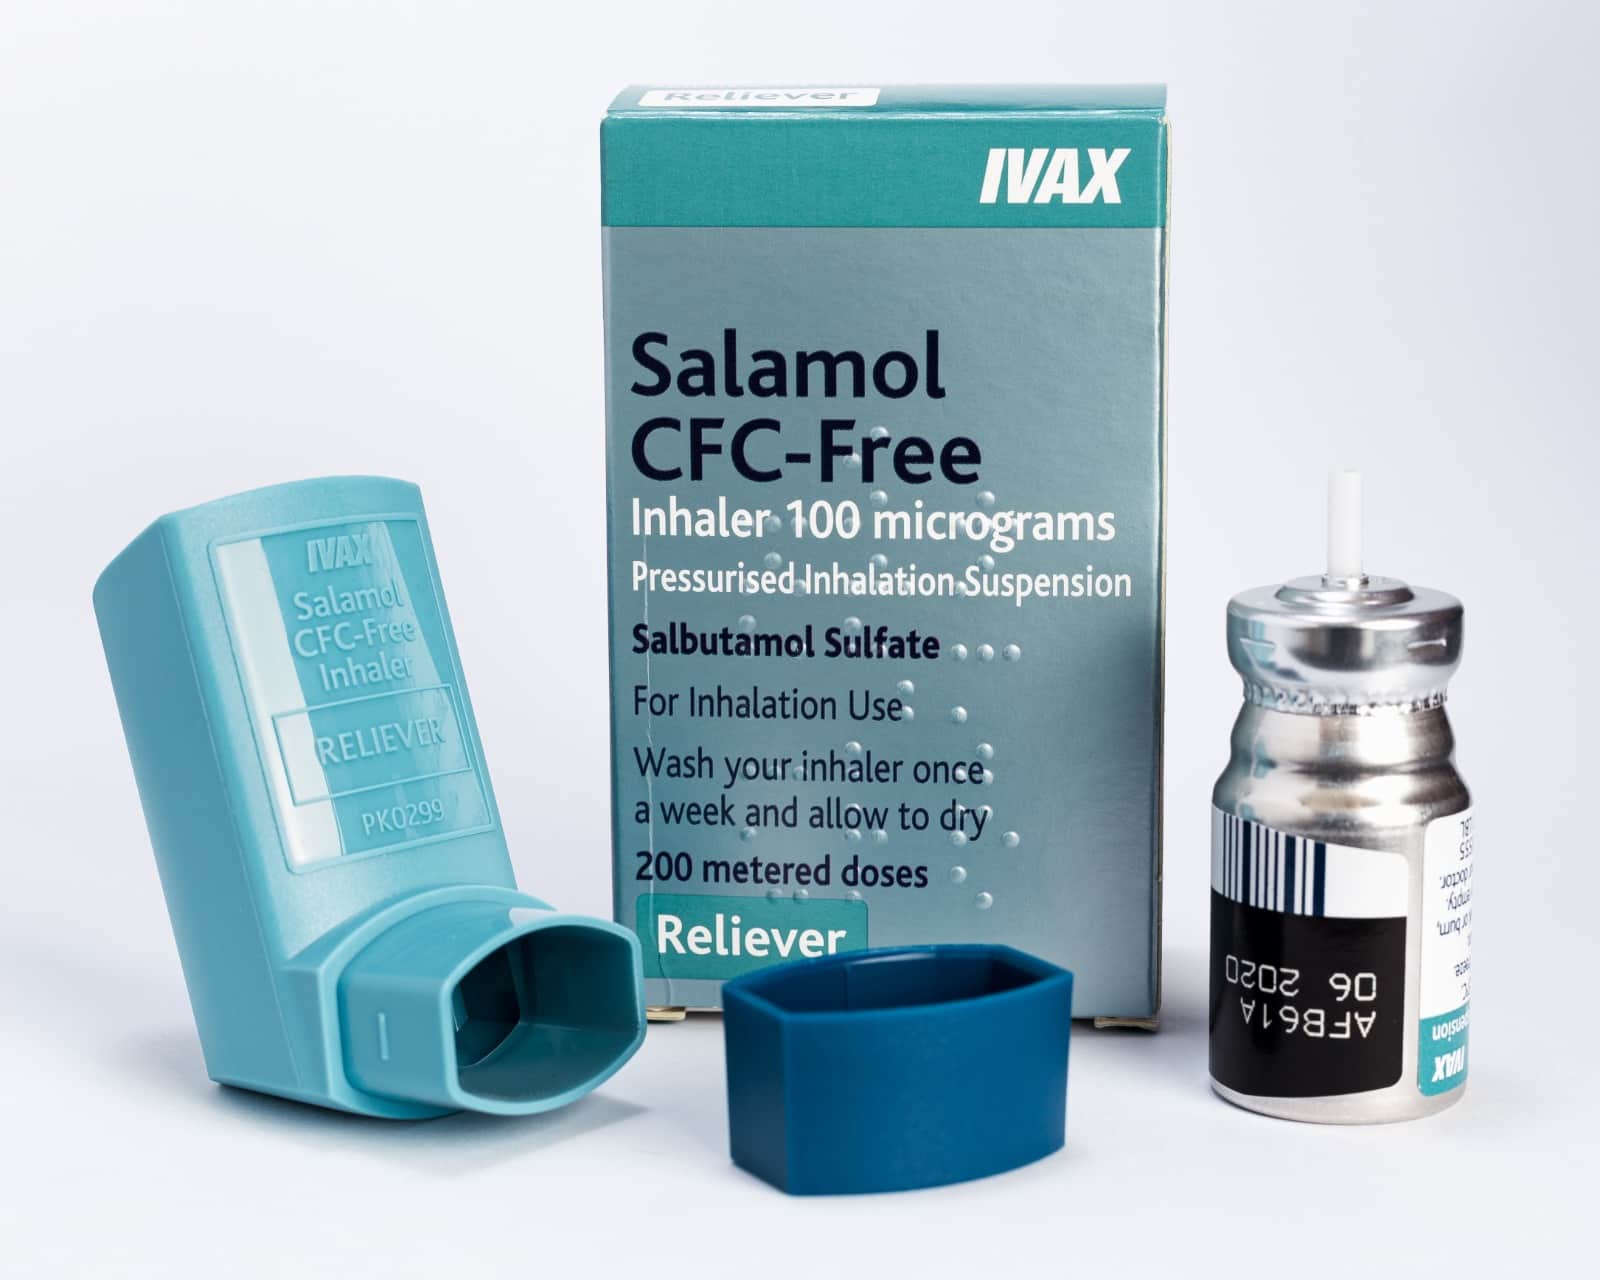 Comparing inhaler options for optimal asthma control